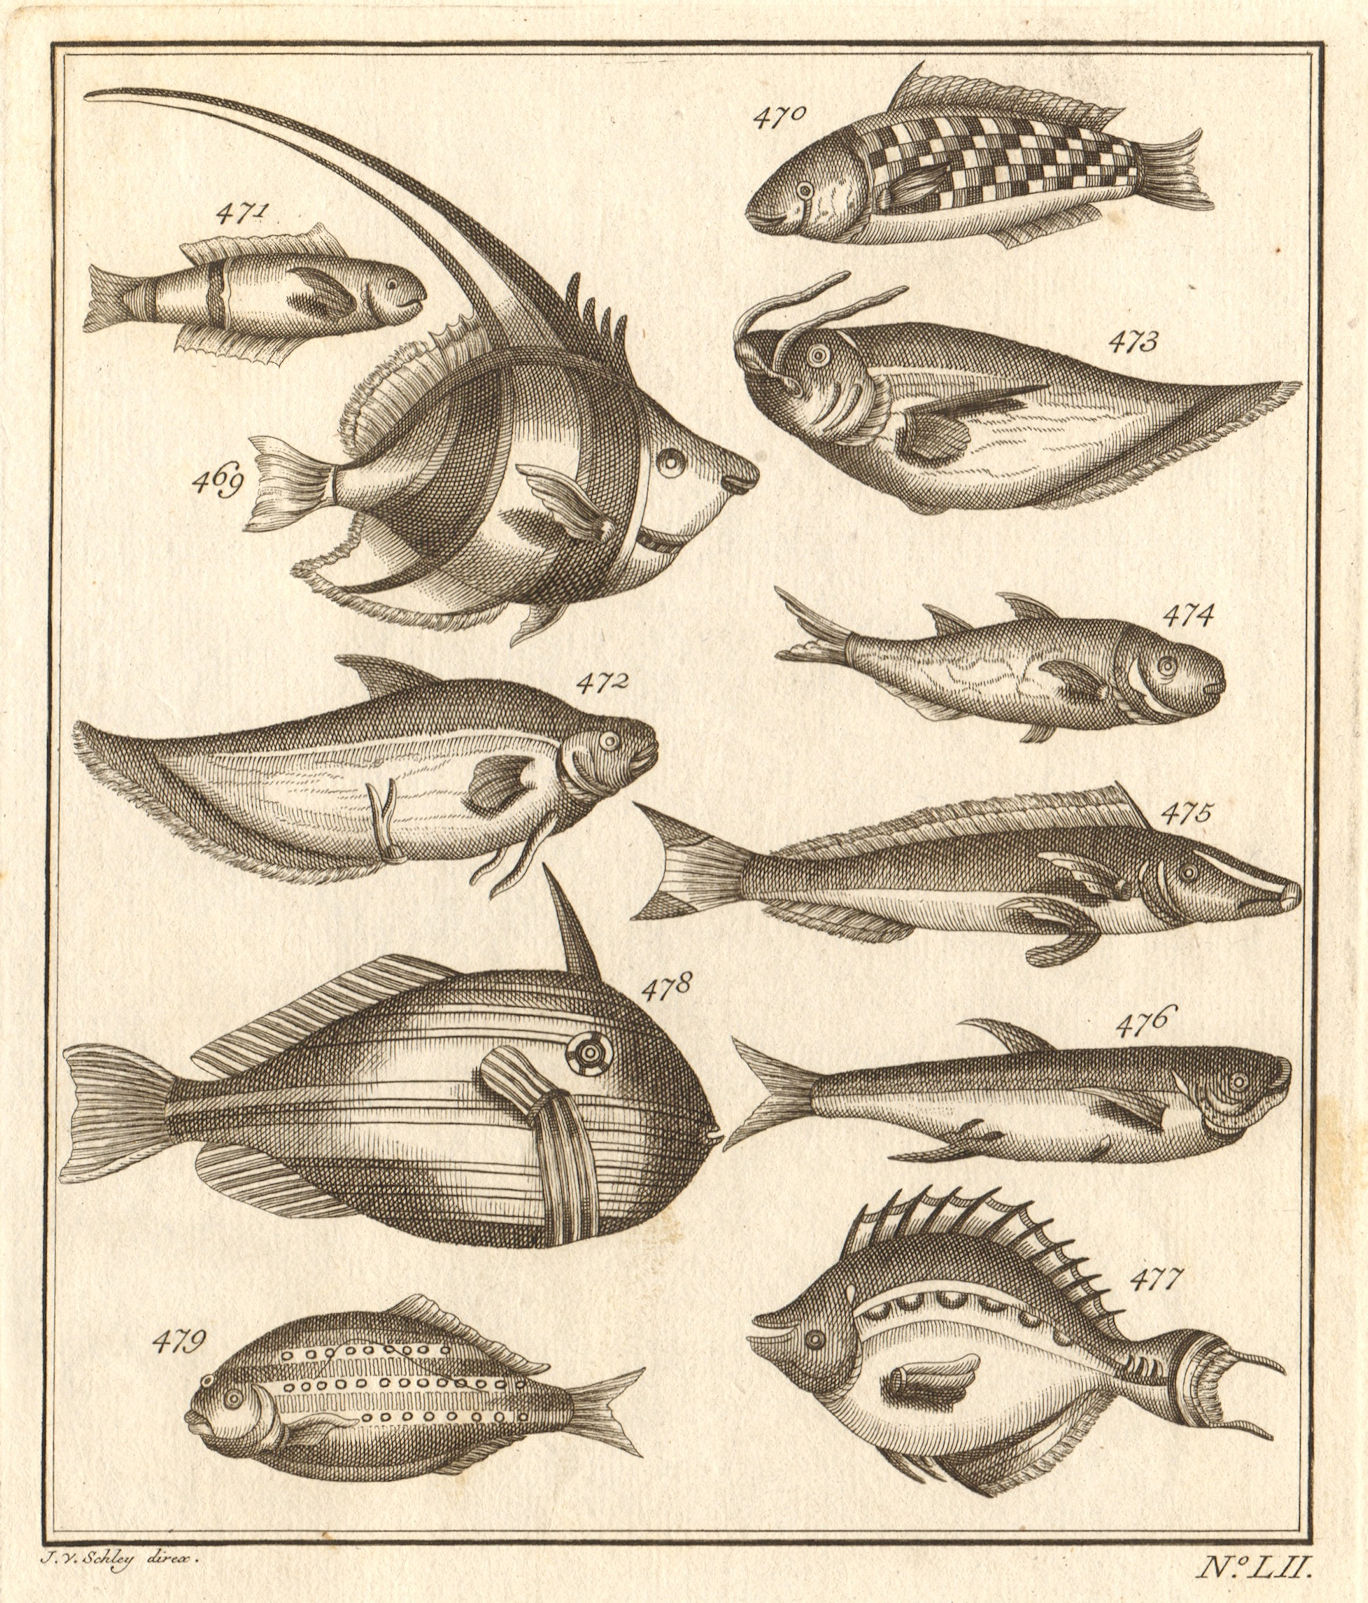 Associate Product LII. Poissons d'Ambione. Indonesia Moluccas Maluku tropical fish. SCHLEY 1763